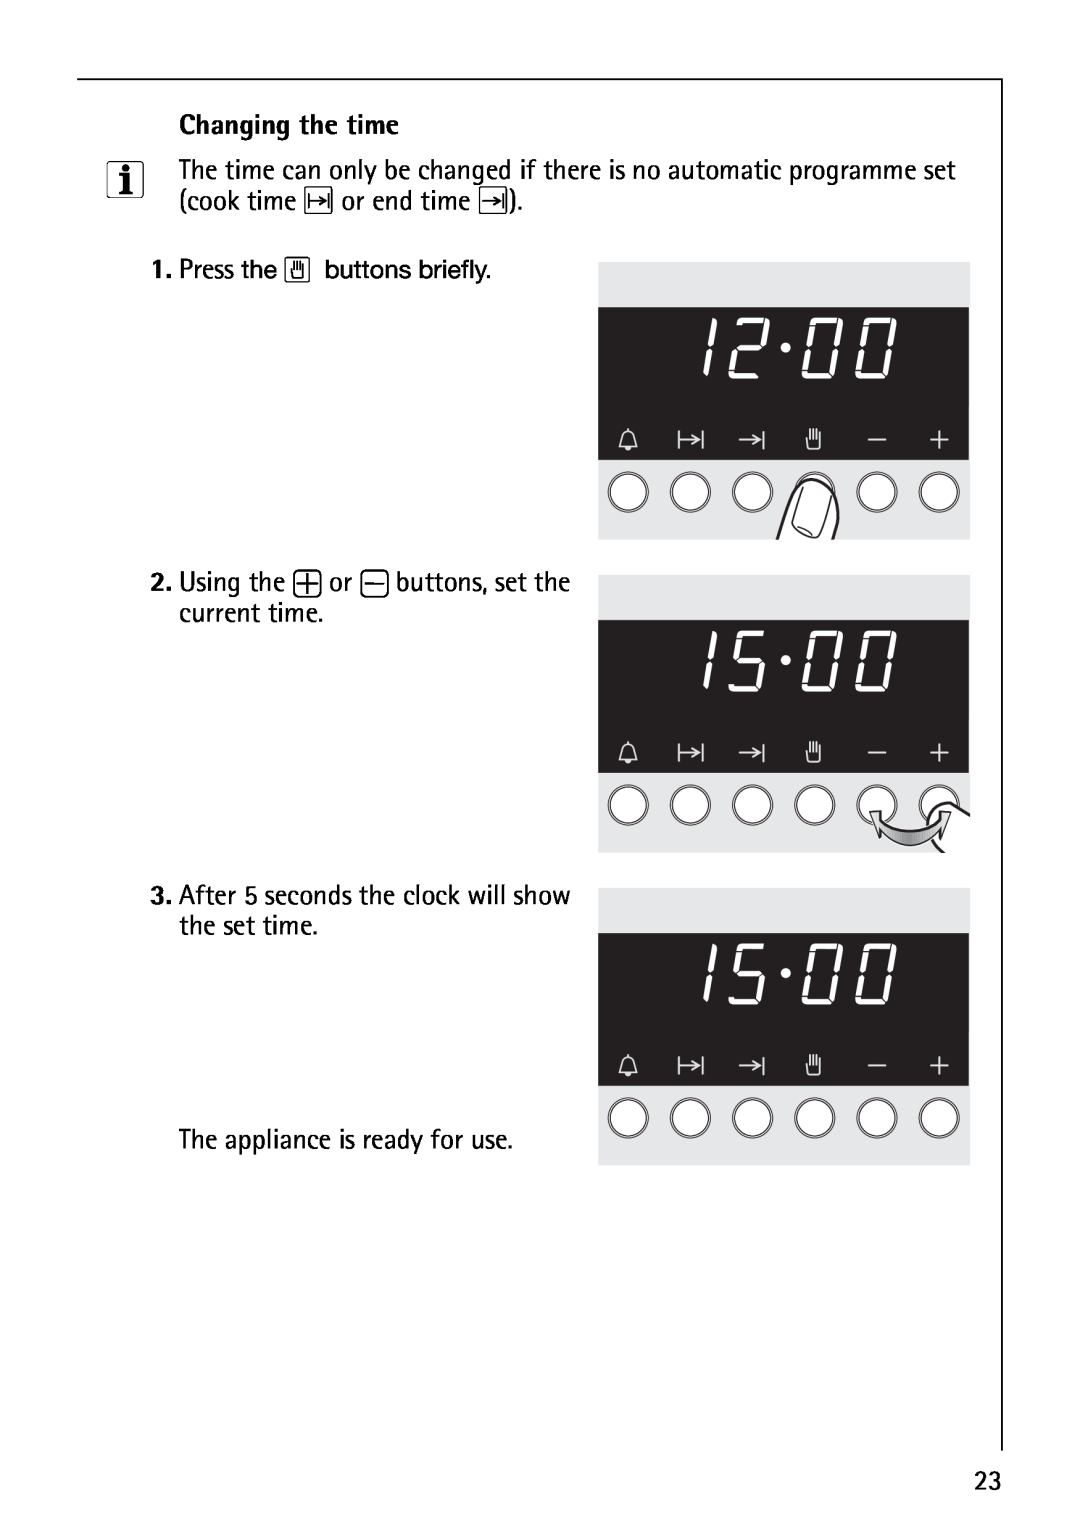 AEG B4130-1 operating instructions Changing the time, cook time or end time, Using the + or - buttons, set the current time 